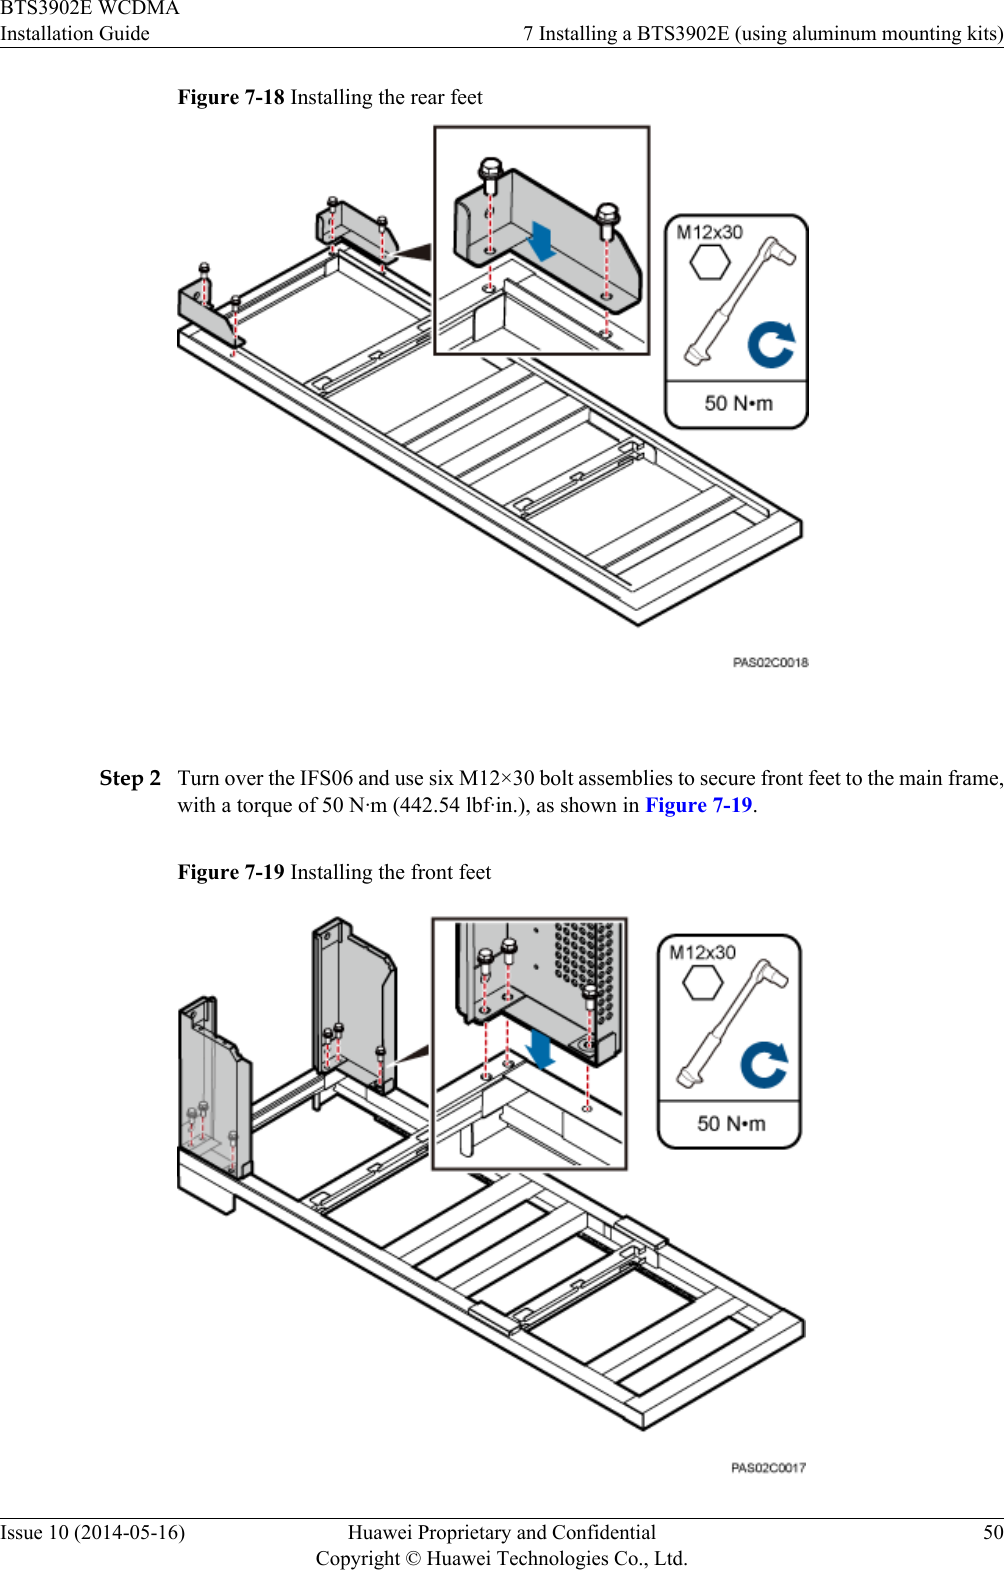 Figure 7-18 Installing the rear feet Step 2 Turn over the IFS06 and use six M12×30 bolt assemblies to secure front feet to the main frame,with a torque of 50 N·m (442.54 lbf·in.), as shown in Figure 7-19.Figure 7-19 Installing the front feetBTS3902E WCDMAInstallation Guide 7 Installing a BTS3902E (using aluminum mounting kits)Issue 10 (2014-05-16) Huawei Proprietary and ConfidentialCopyright © Huawei Technologies Co., Ltd.50